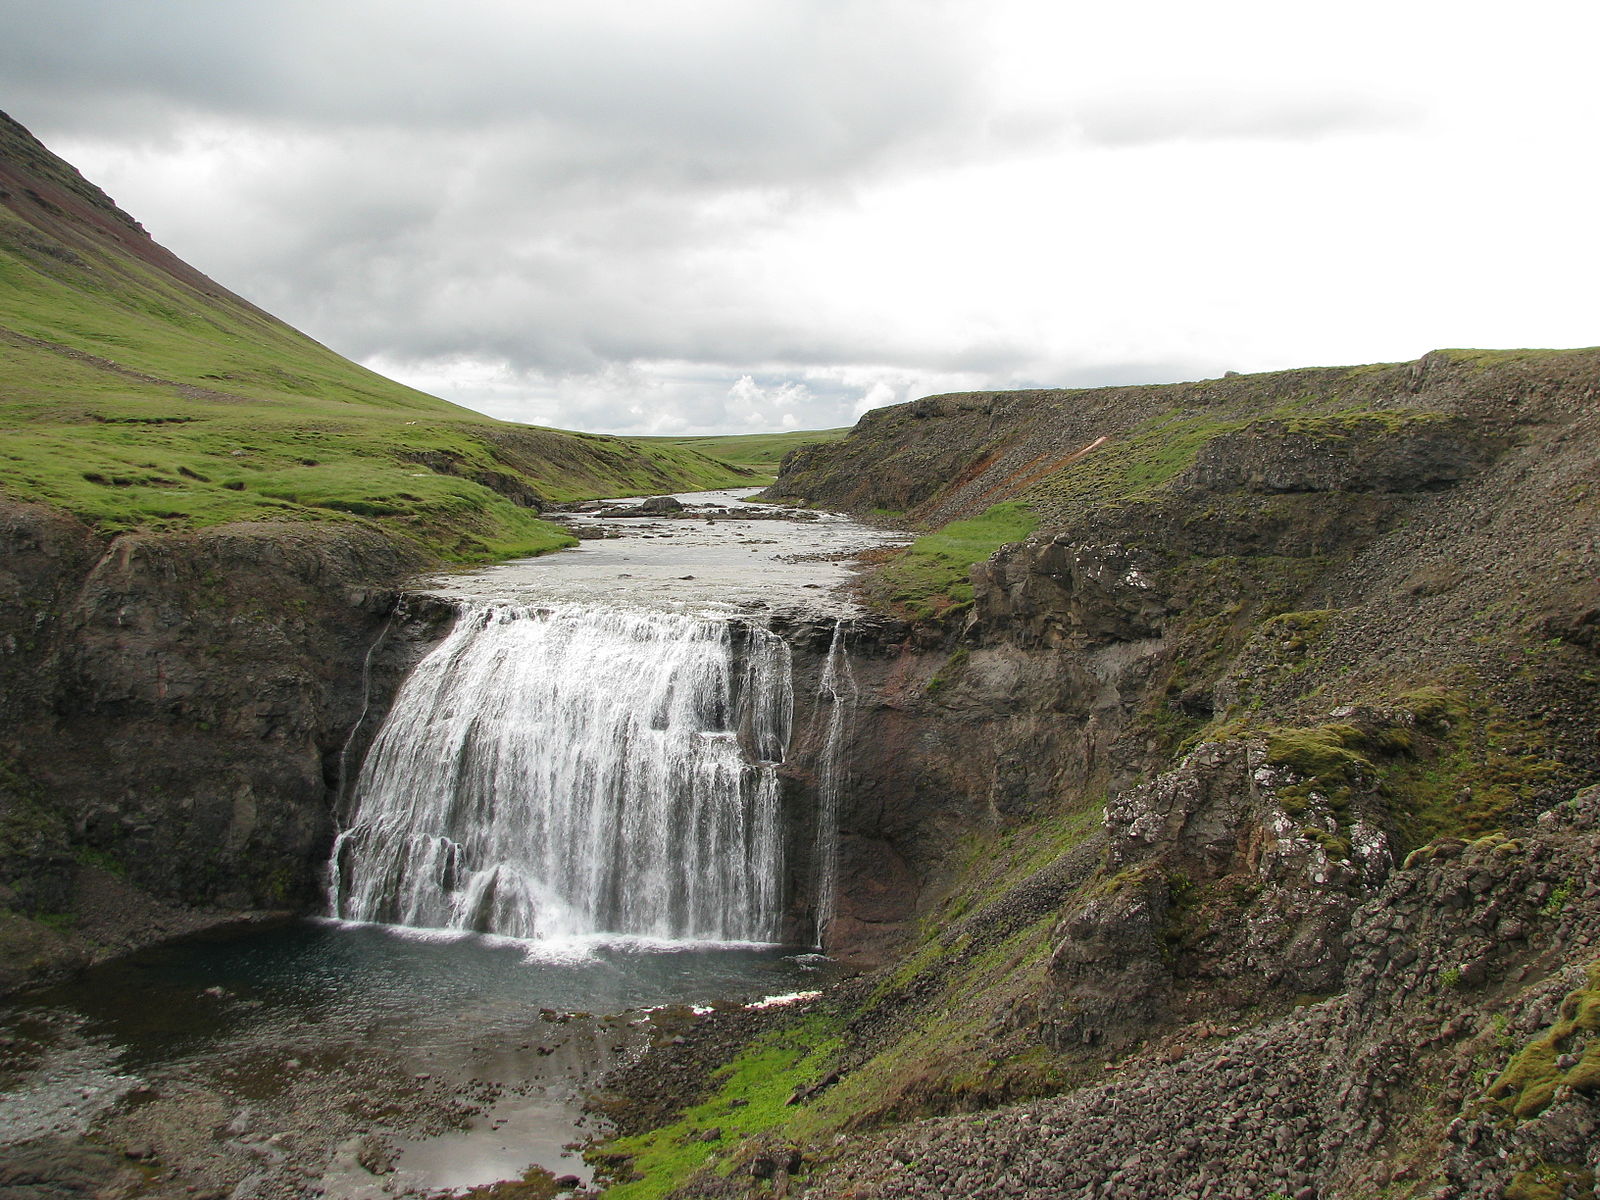 Þórufoss is a beautiful waterfall that is situated close to Þingvallavatn lake.